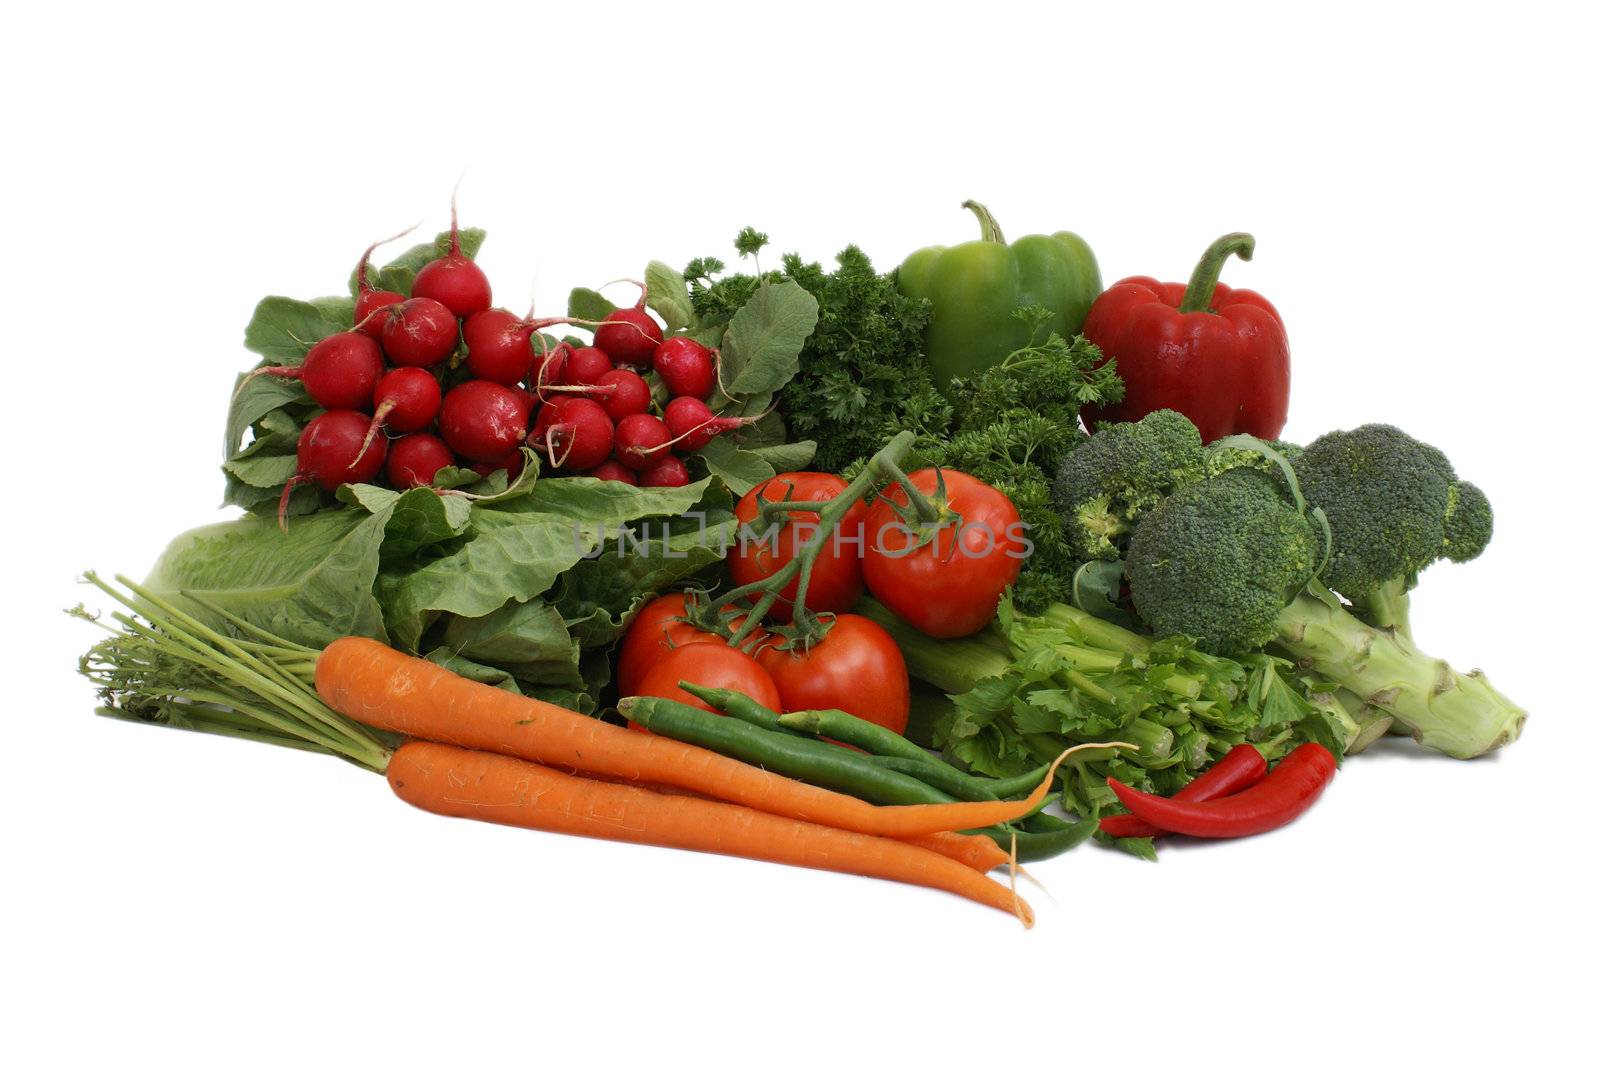 An arrangement of various vegetables on white background.